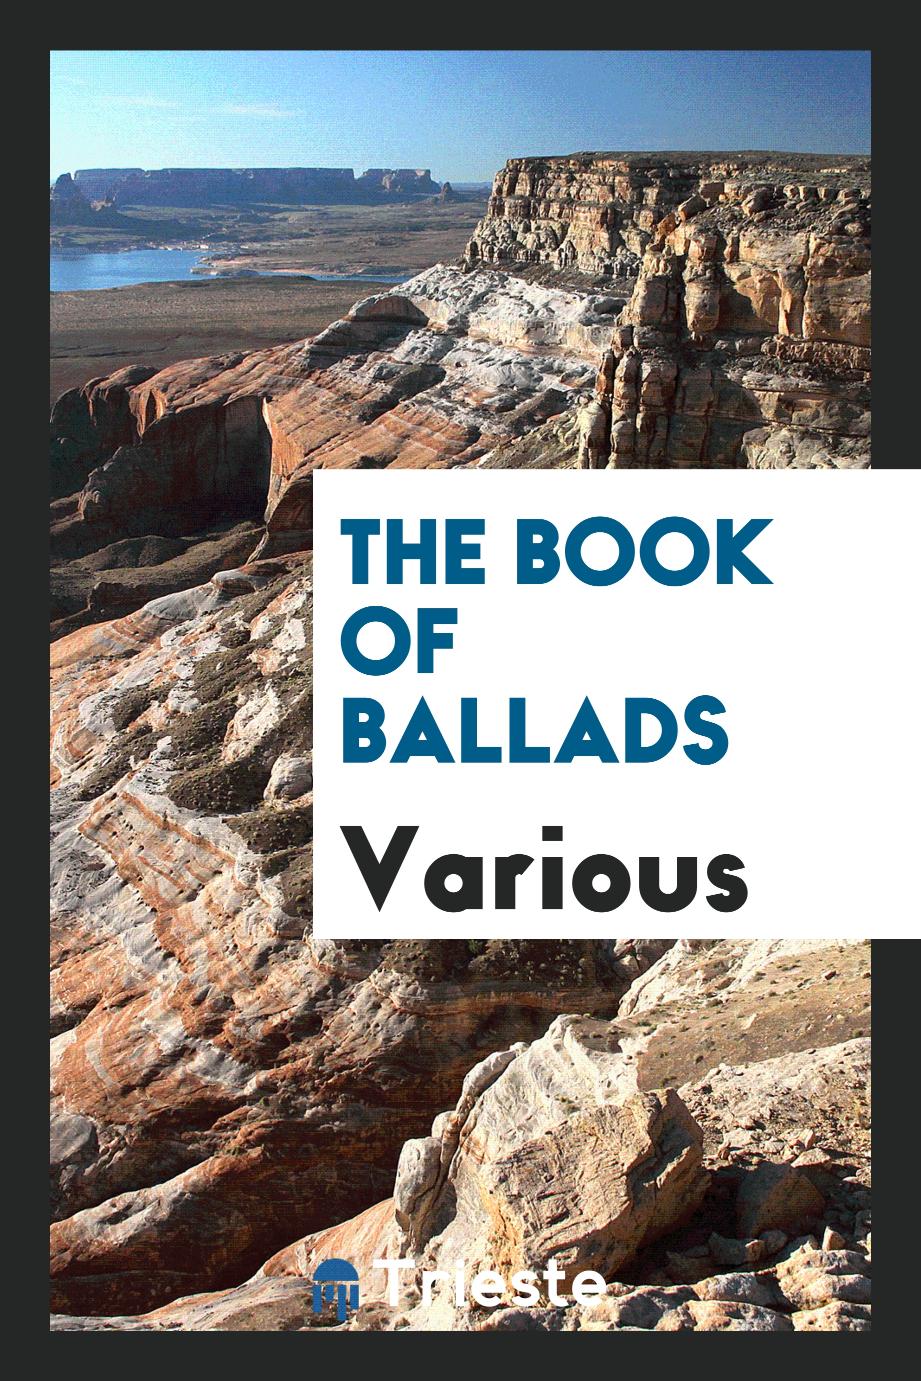 The book of ballads